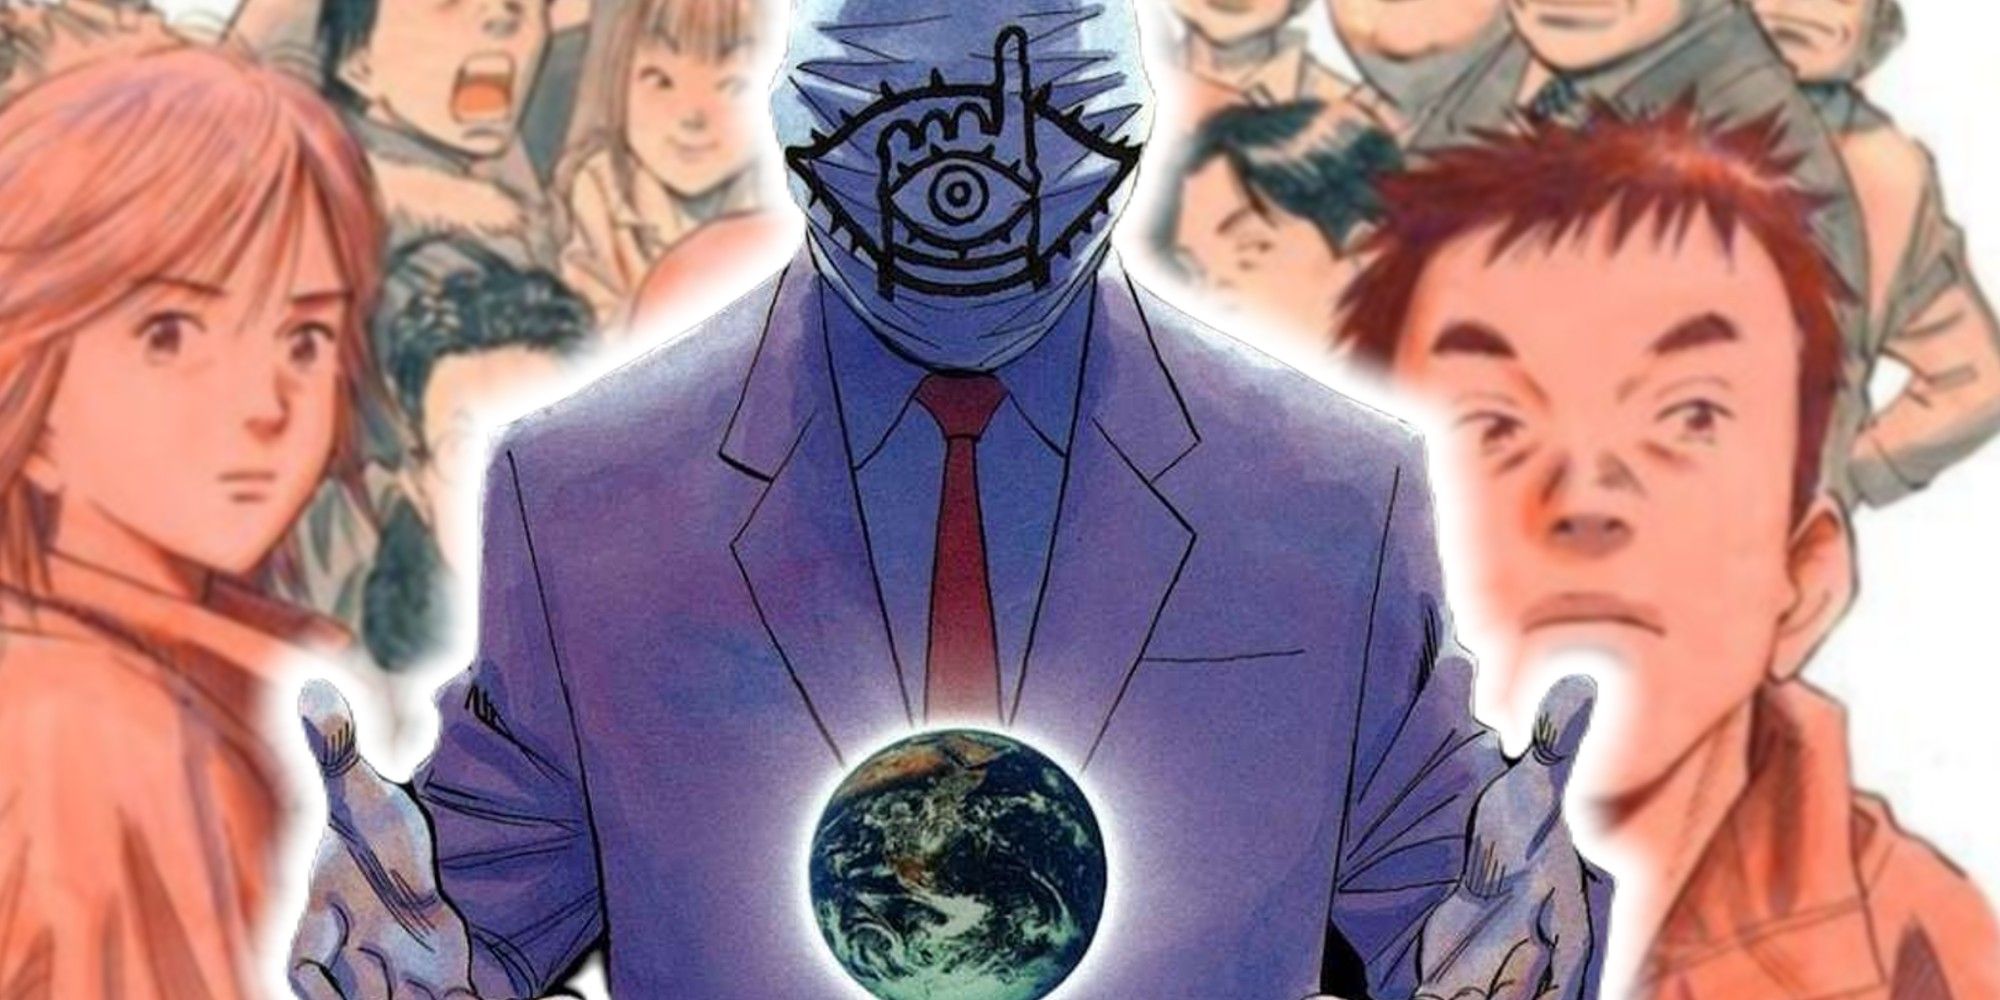 Friend from 20th Century Boys in front of characters from the series